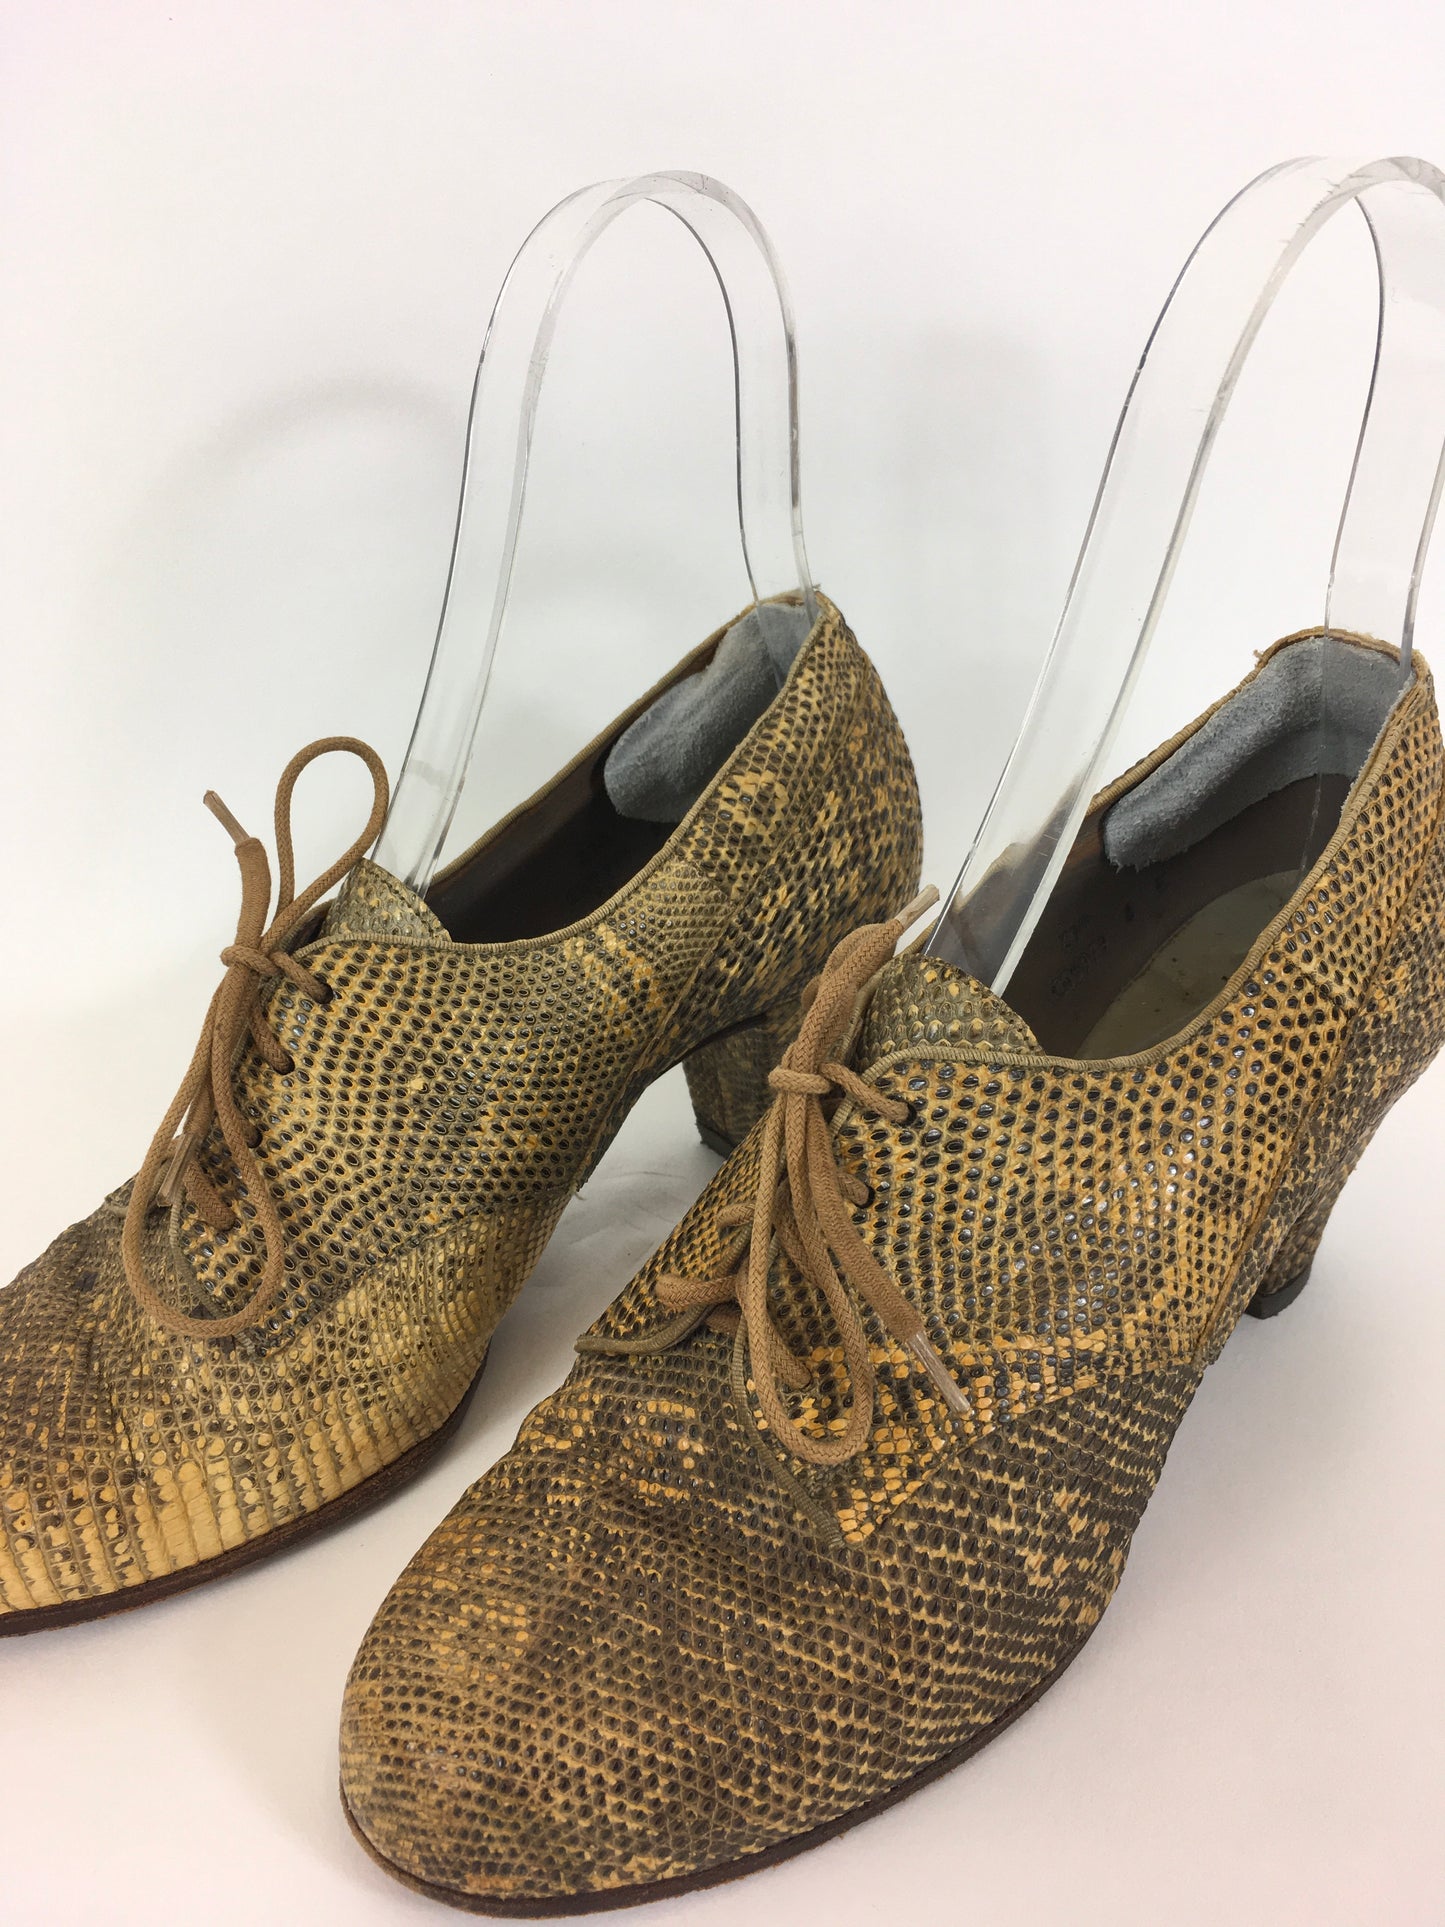 Original 1940’s Fabulous Snakeskin Heeled Lace Up Shoes - In A Lovely Warm Golden Tone